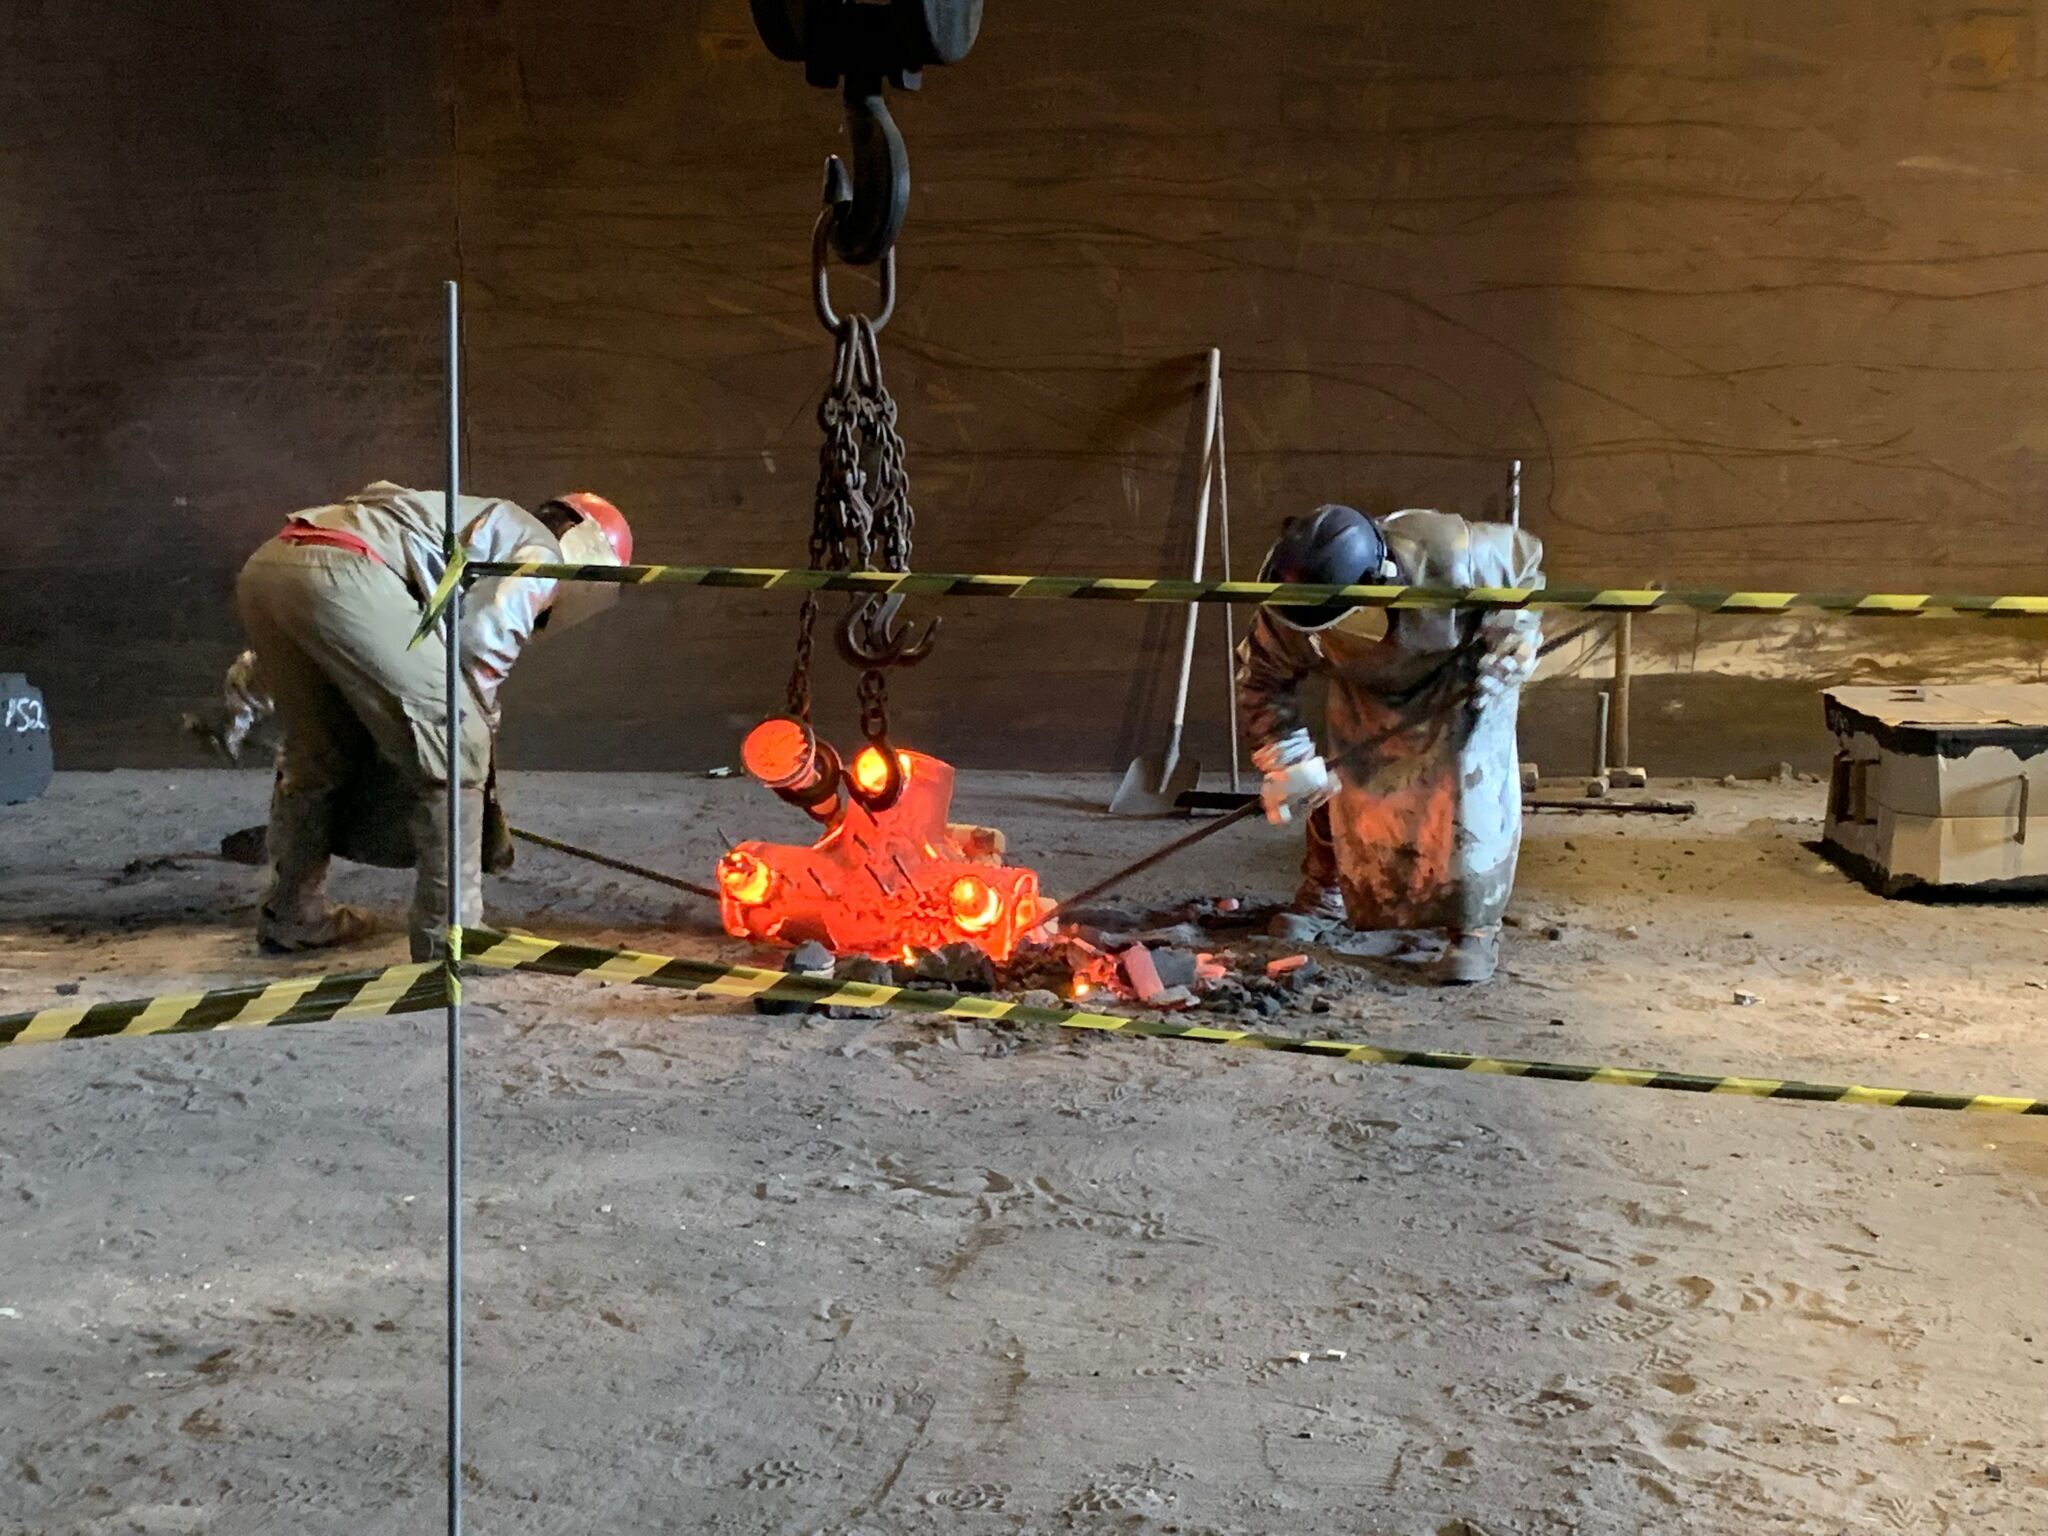 Metalworkers manipulating a large piece of red-hot steel in the fire during the casting process.